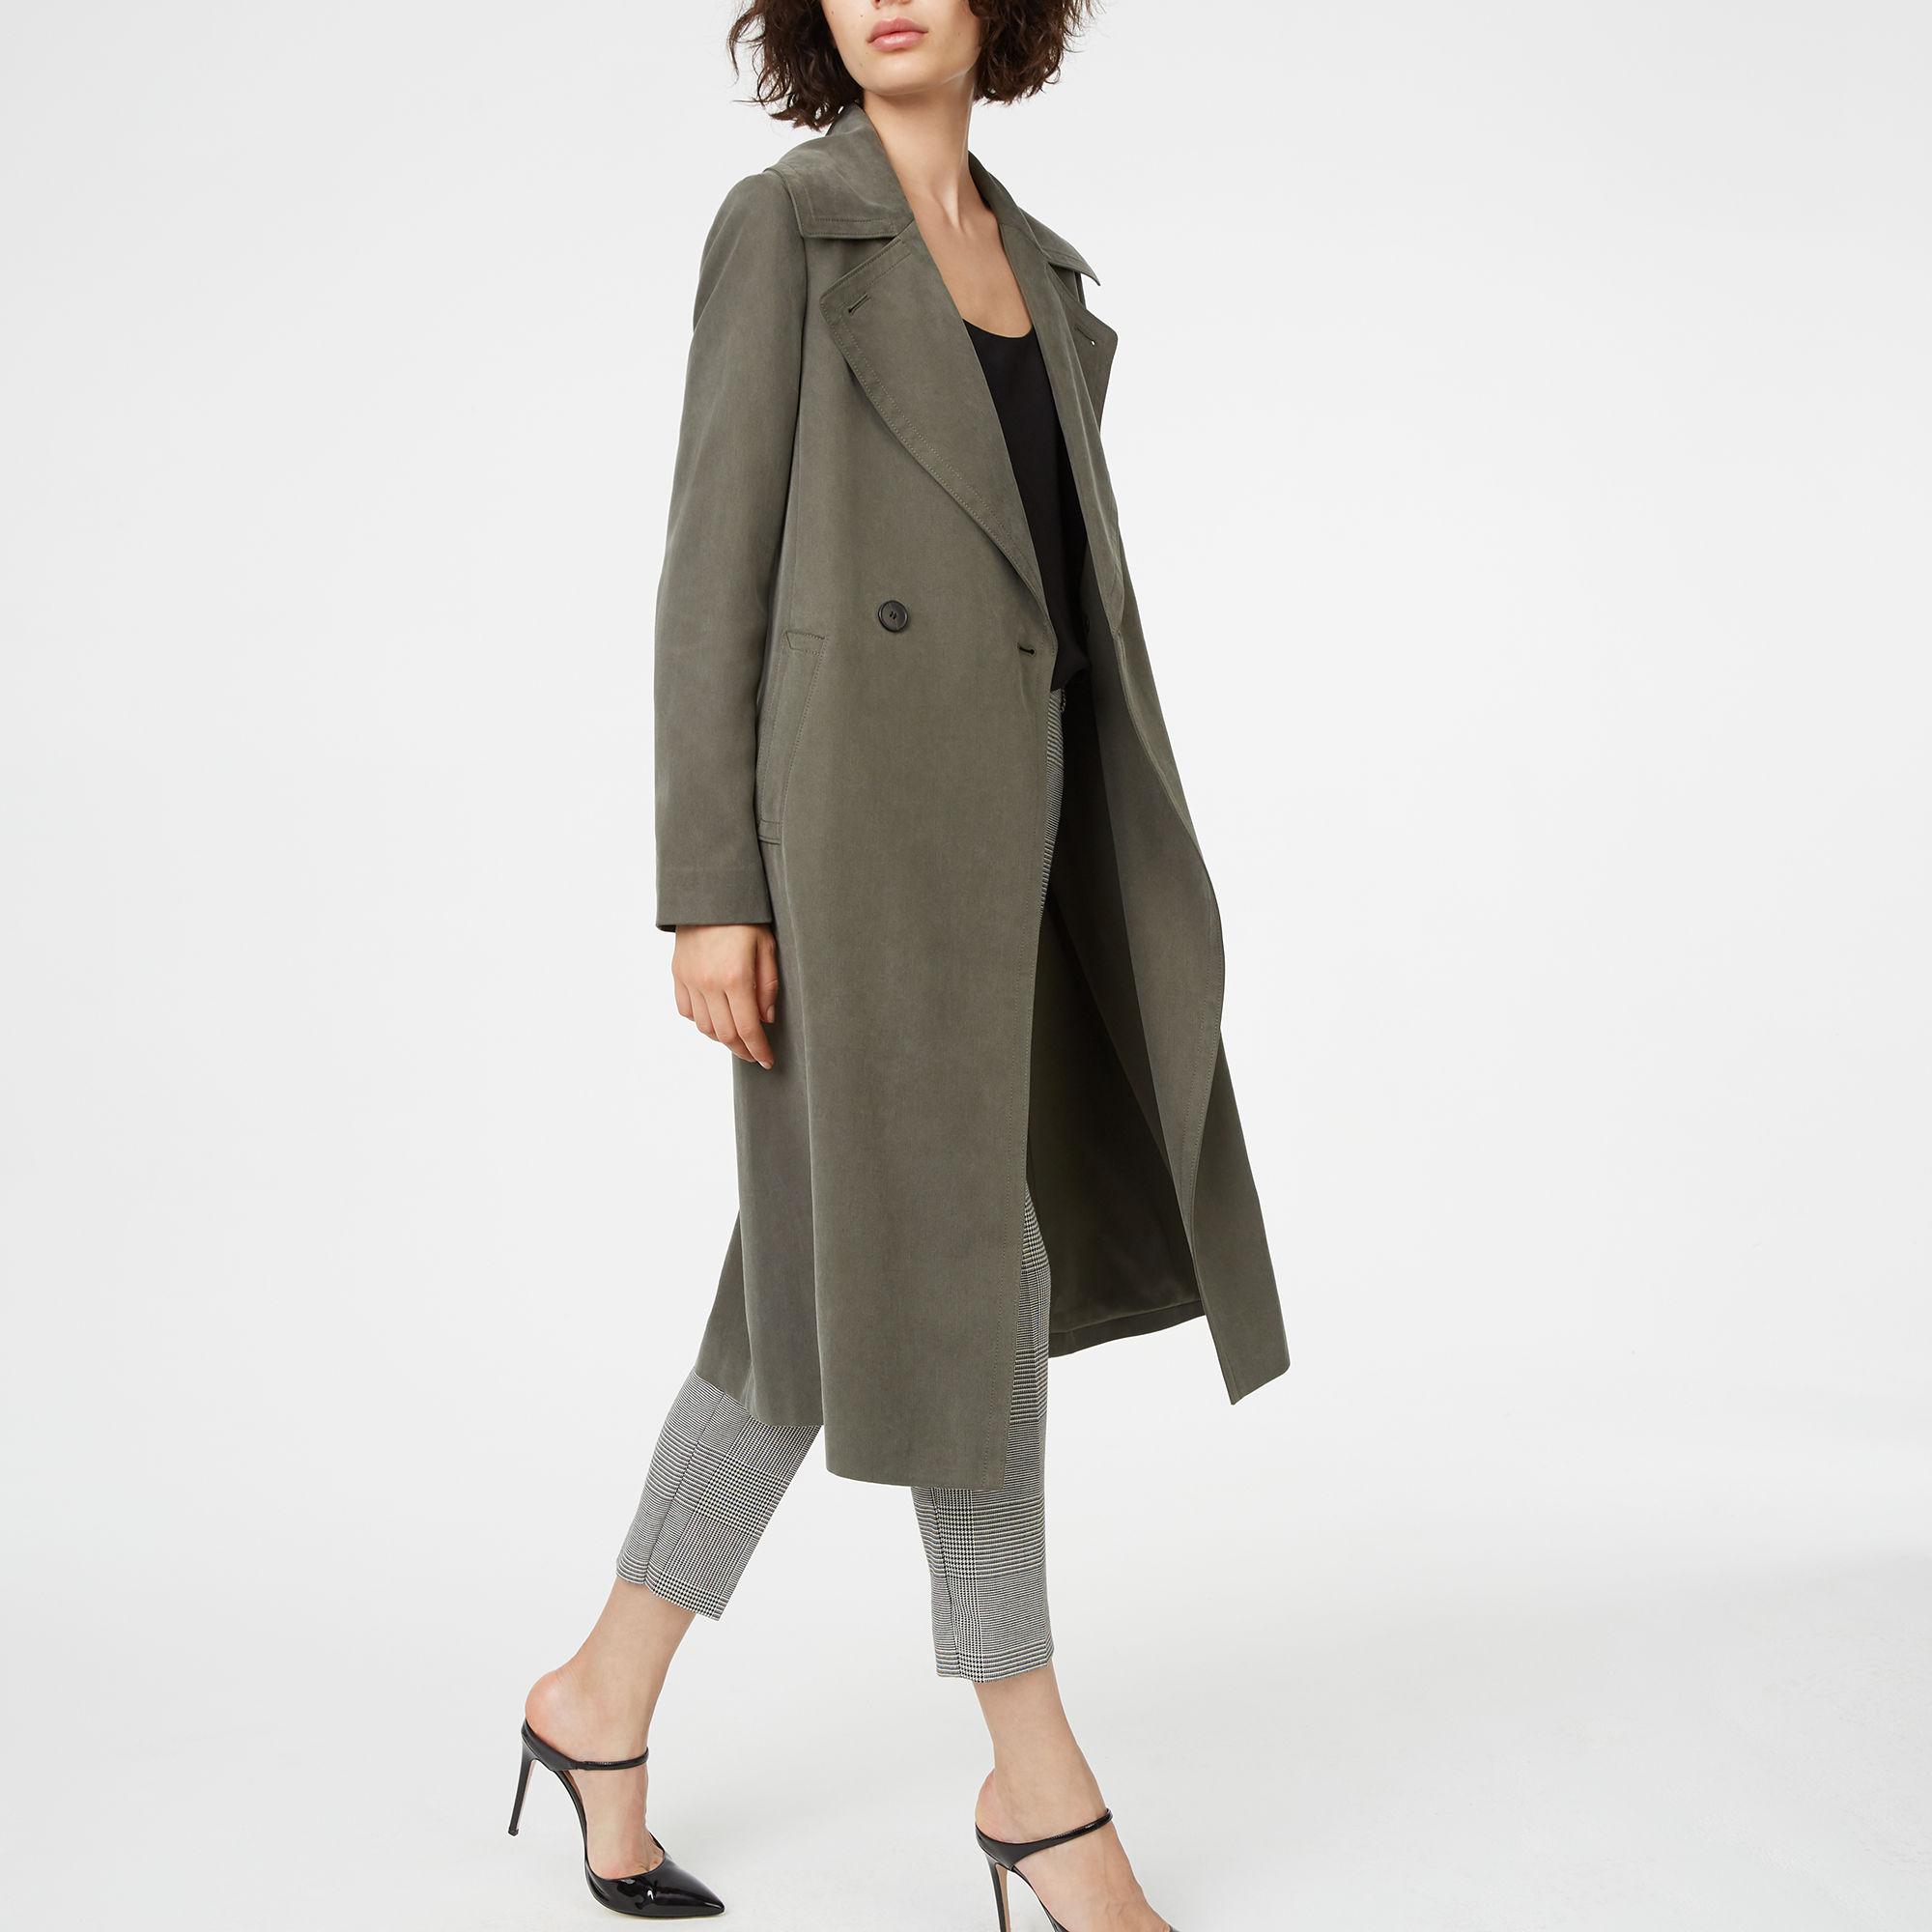 Parity > club monaco trench coat, Up to 77% OFF